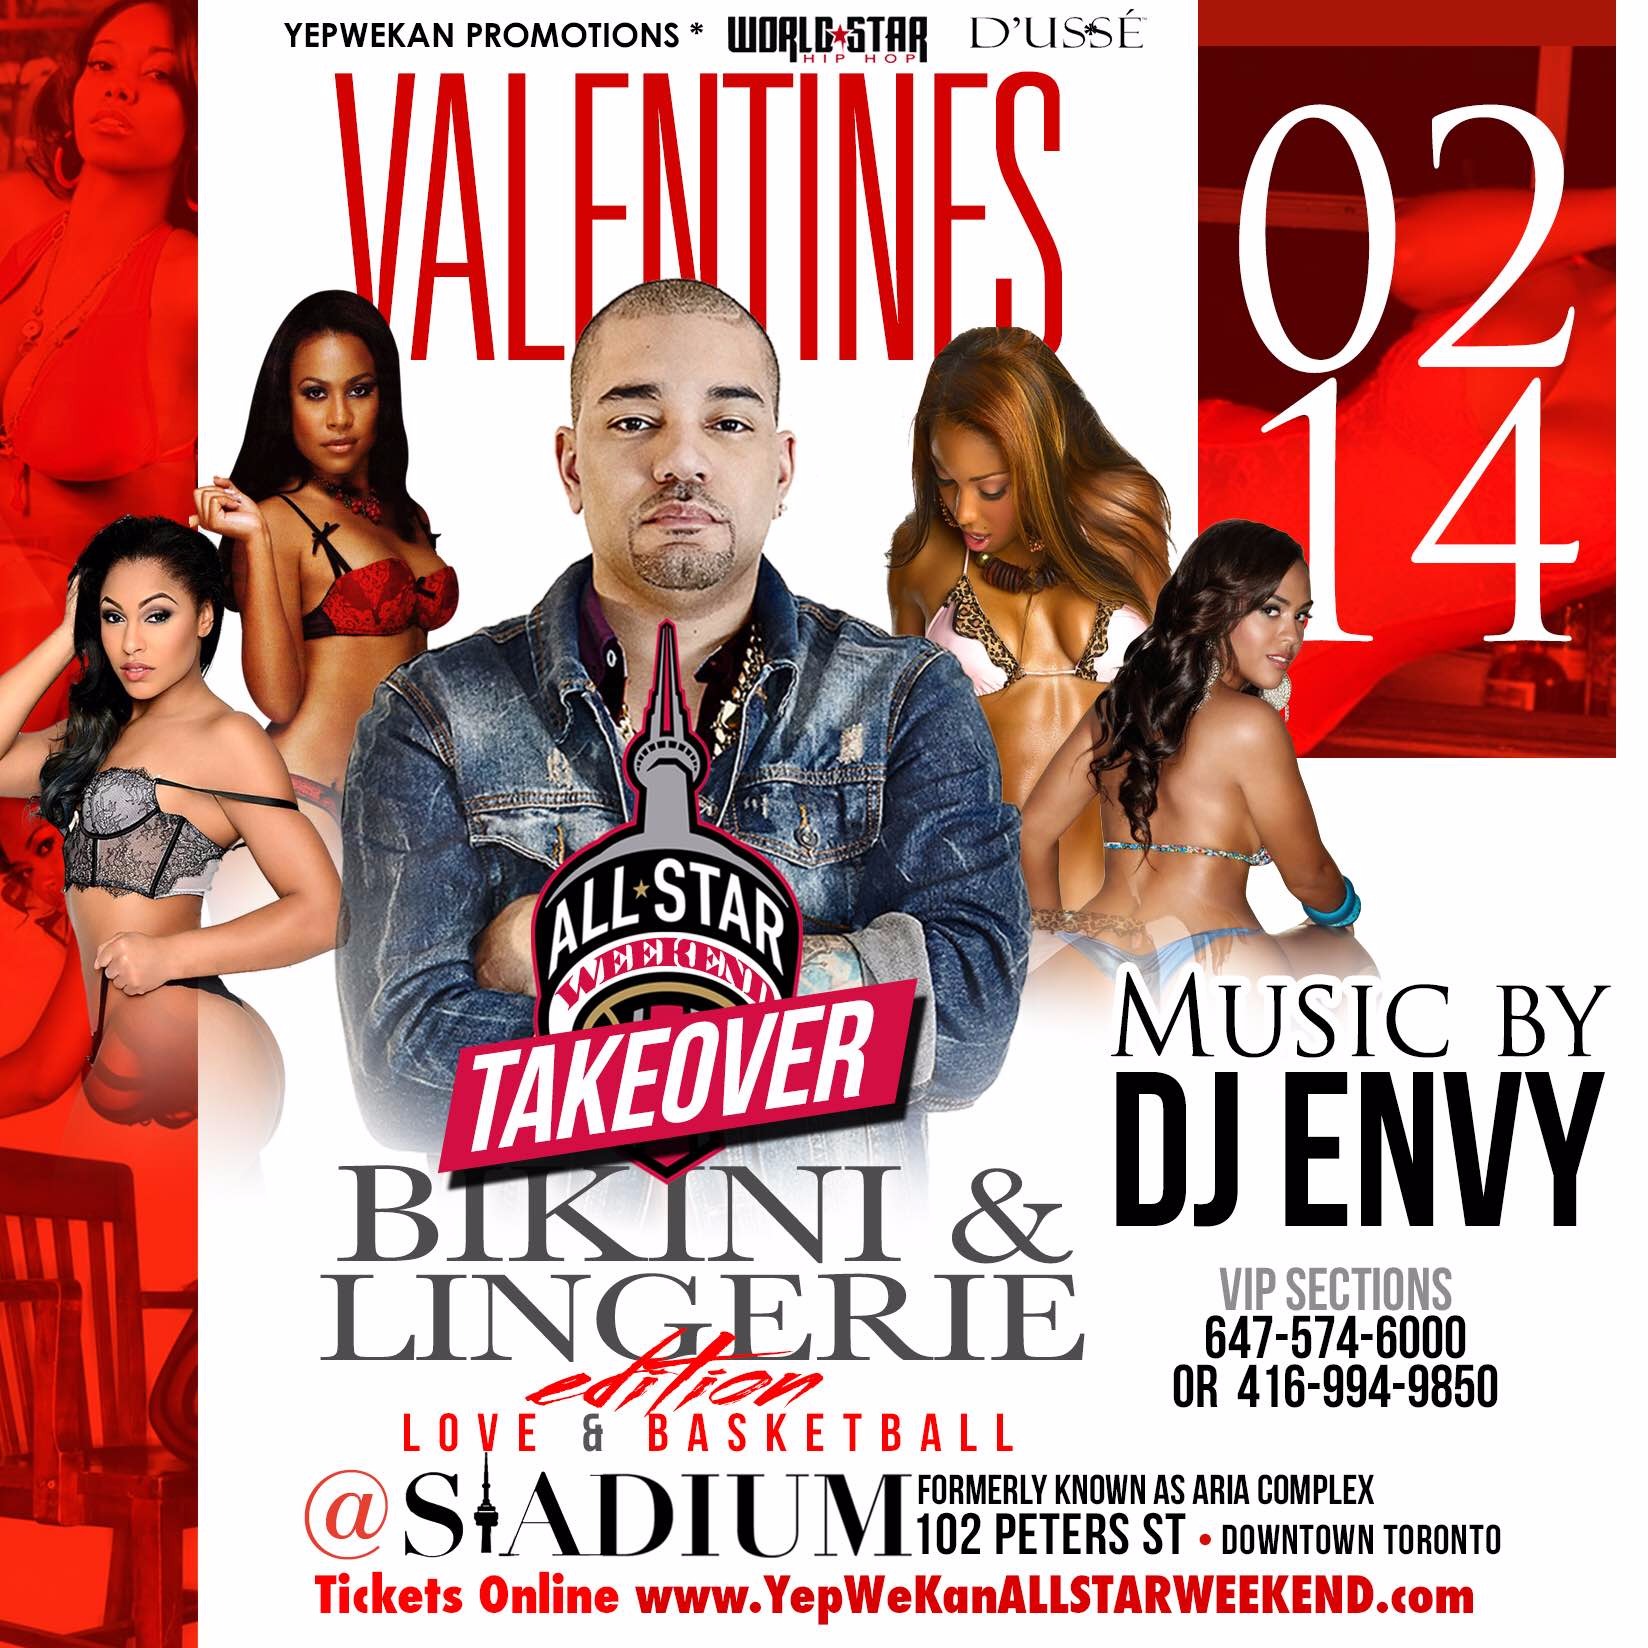 Valentines // All Star Weekend Takeover Bikini & Lingerie Edition 